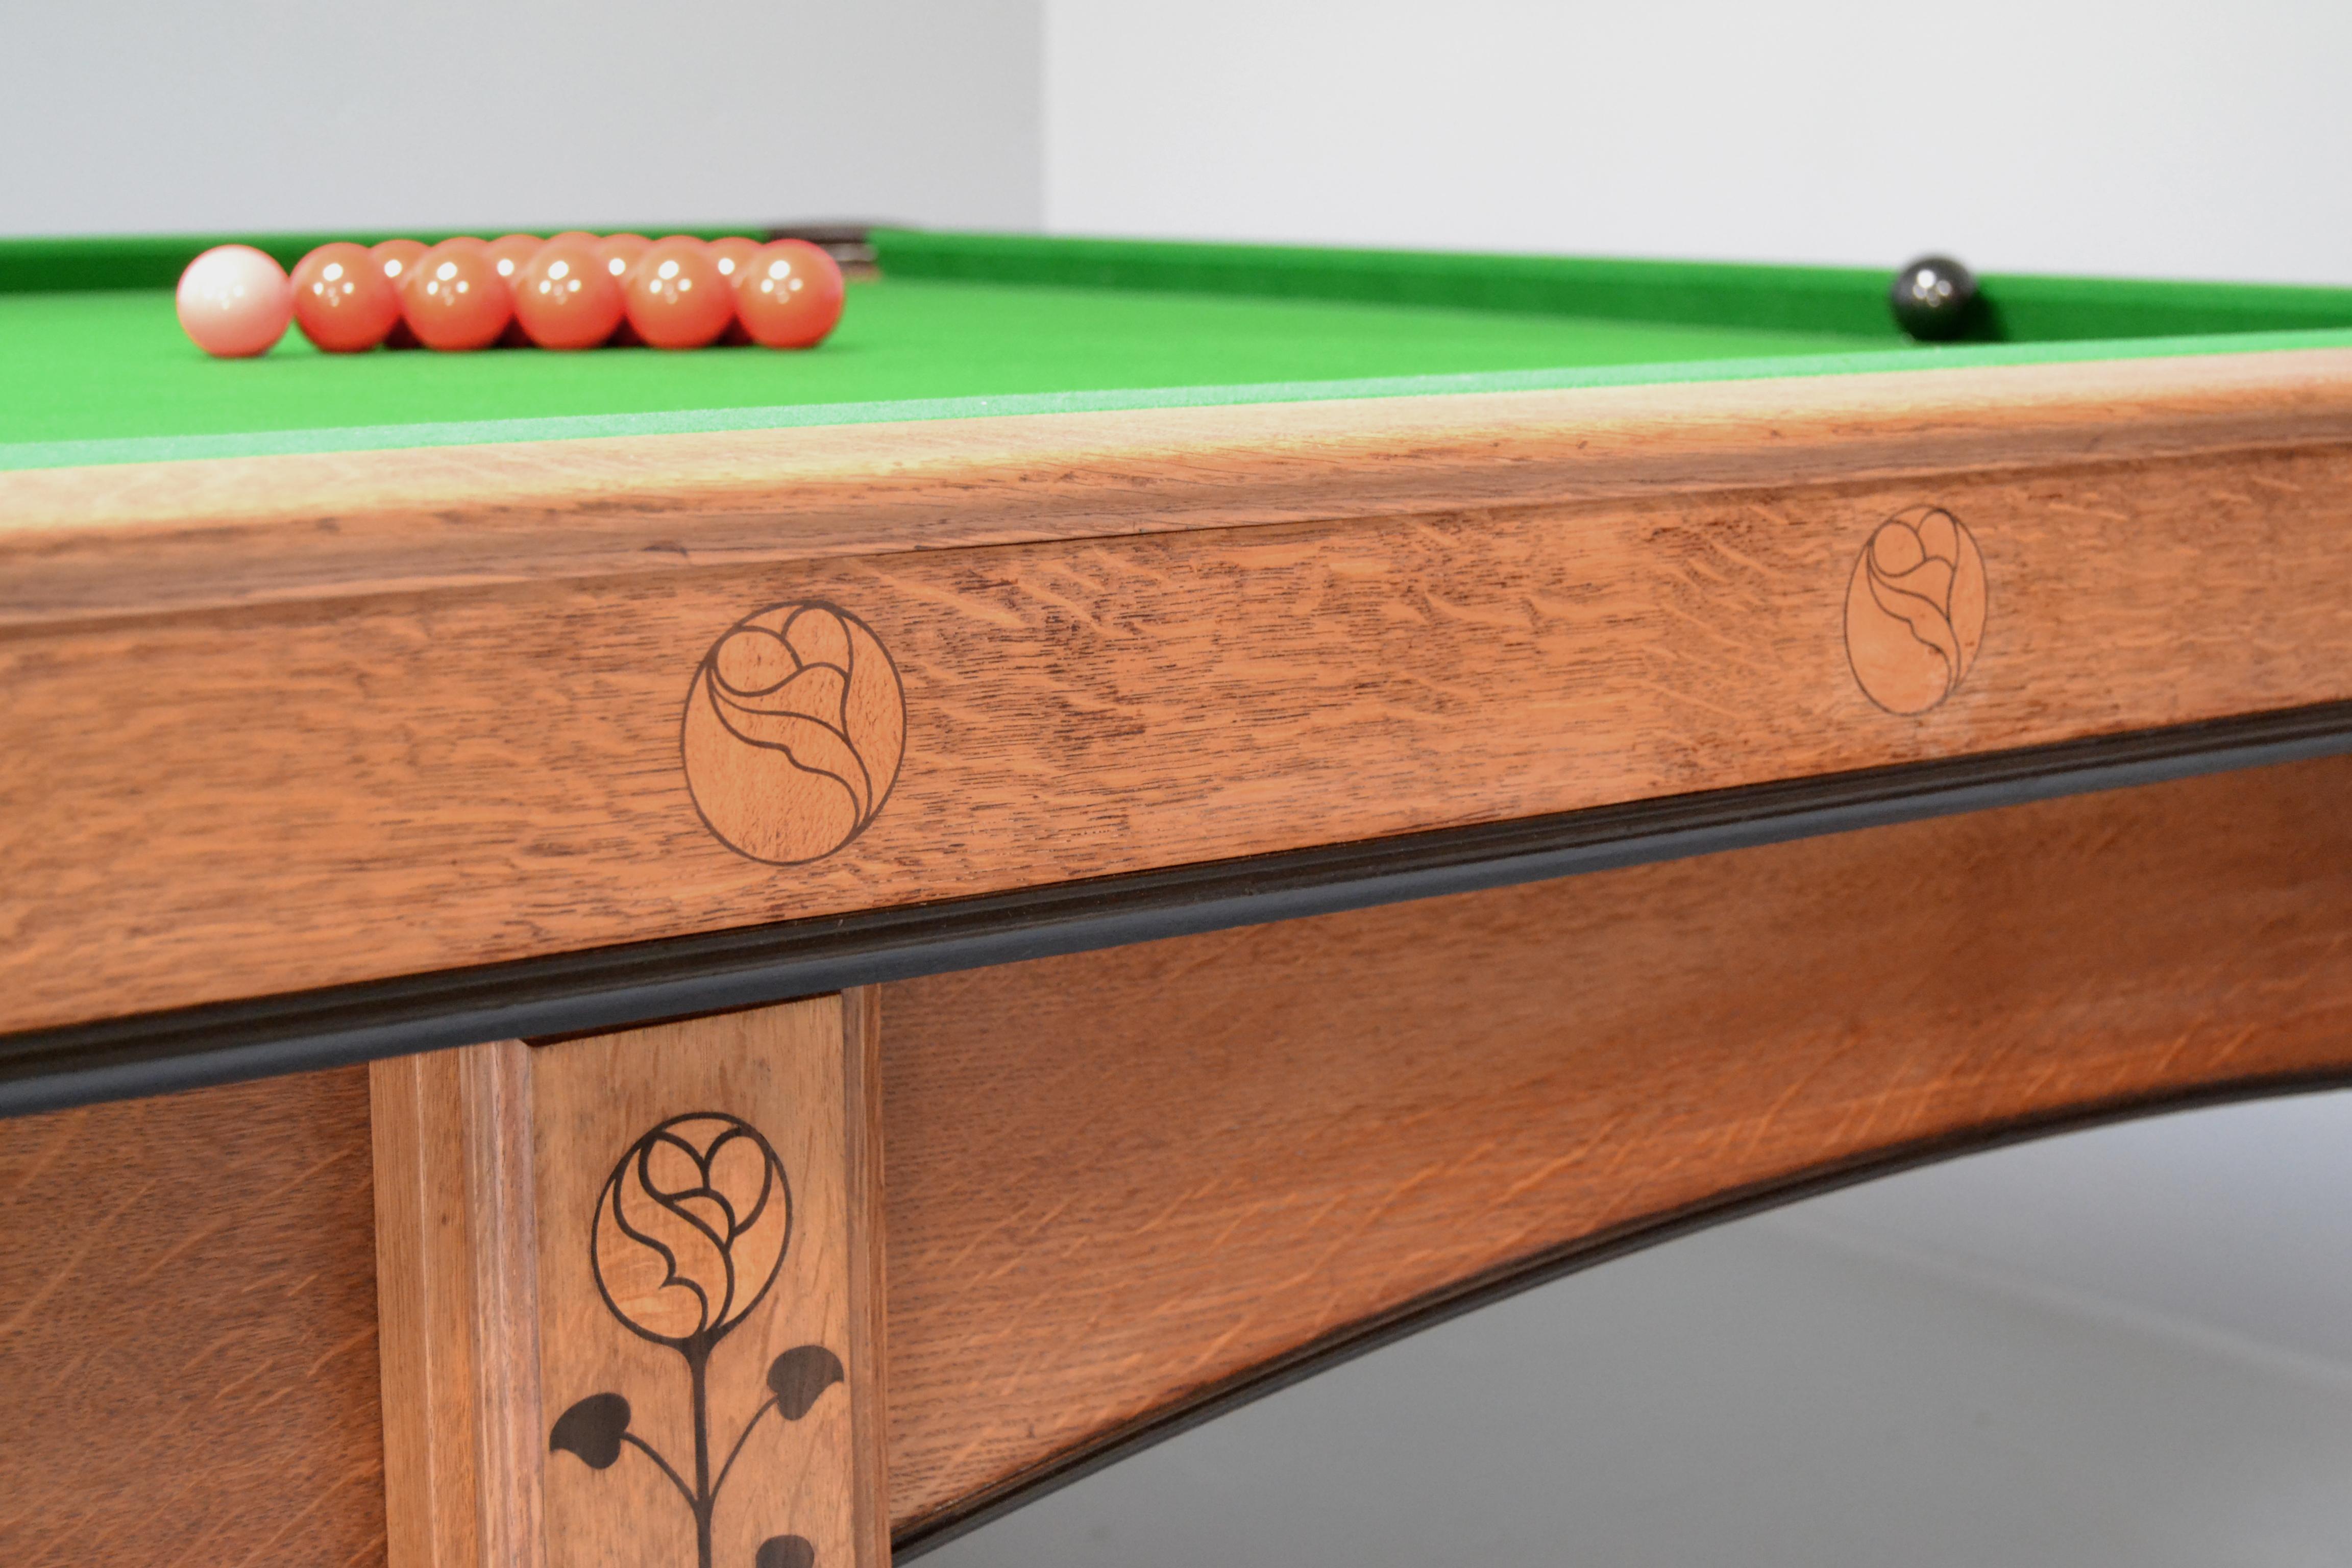 Billiard snooker pool table oak inlaid arts and crafts glasgow school scotland For Sale 4